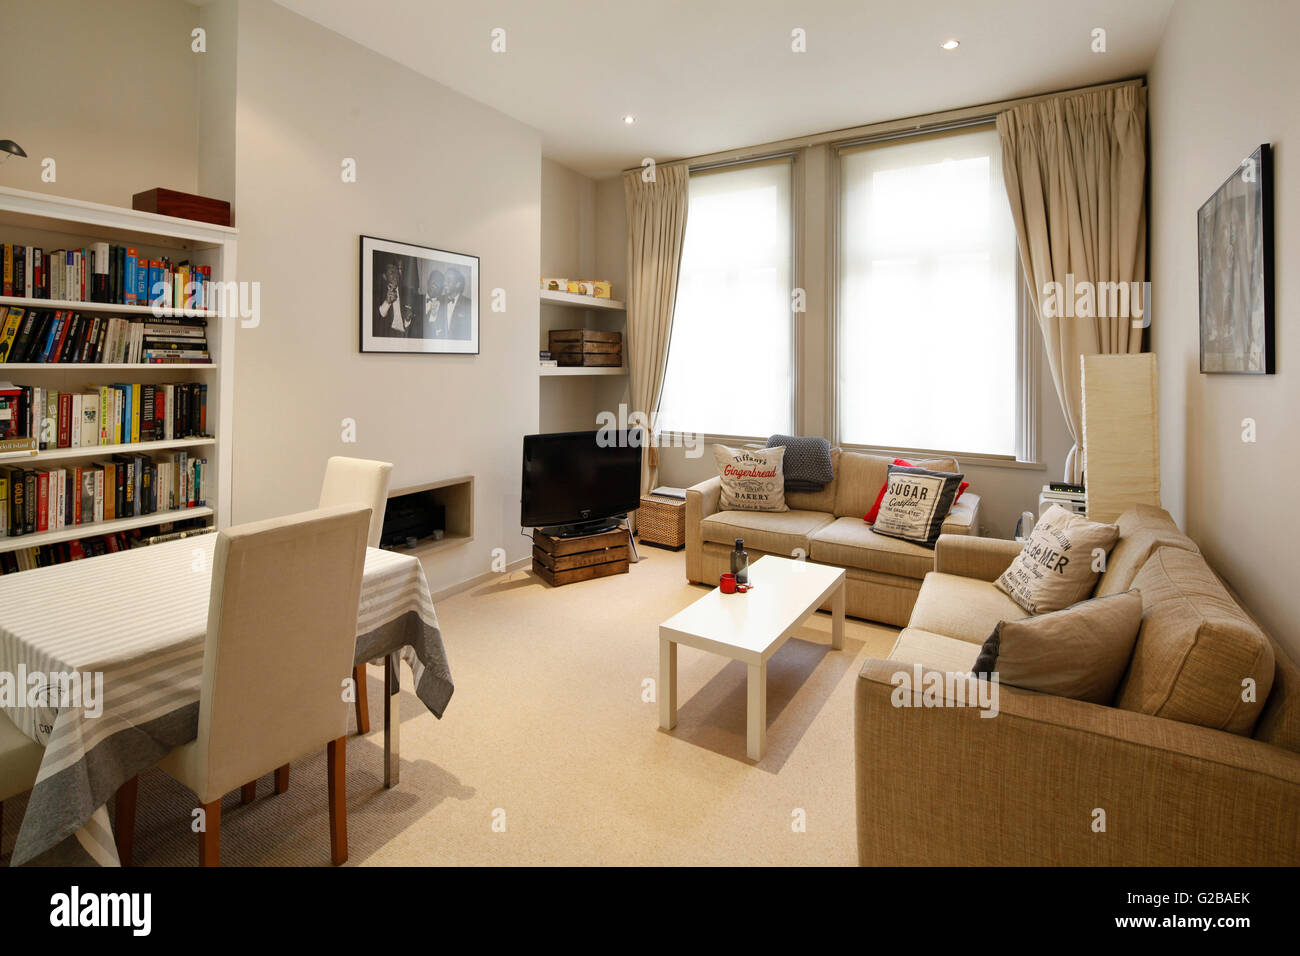 Foley House, Maddox Street. Open plan living room and dining area with large windows and neutral tones. Stock Photo